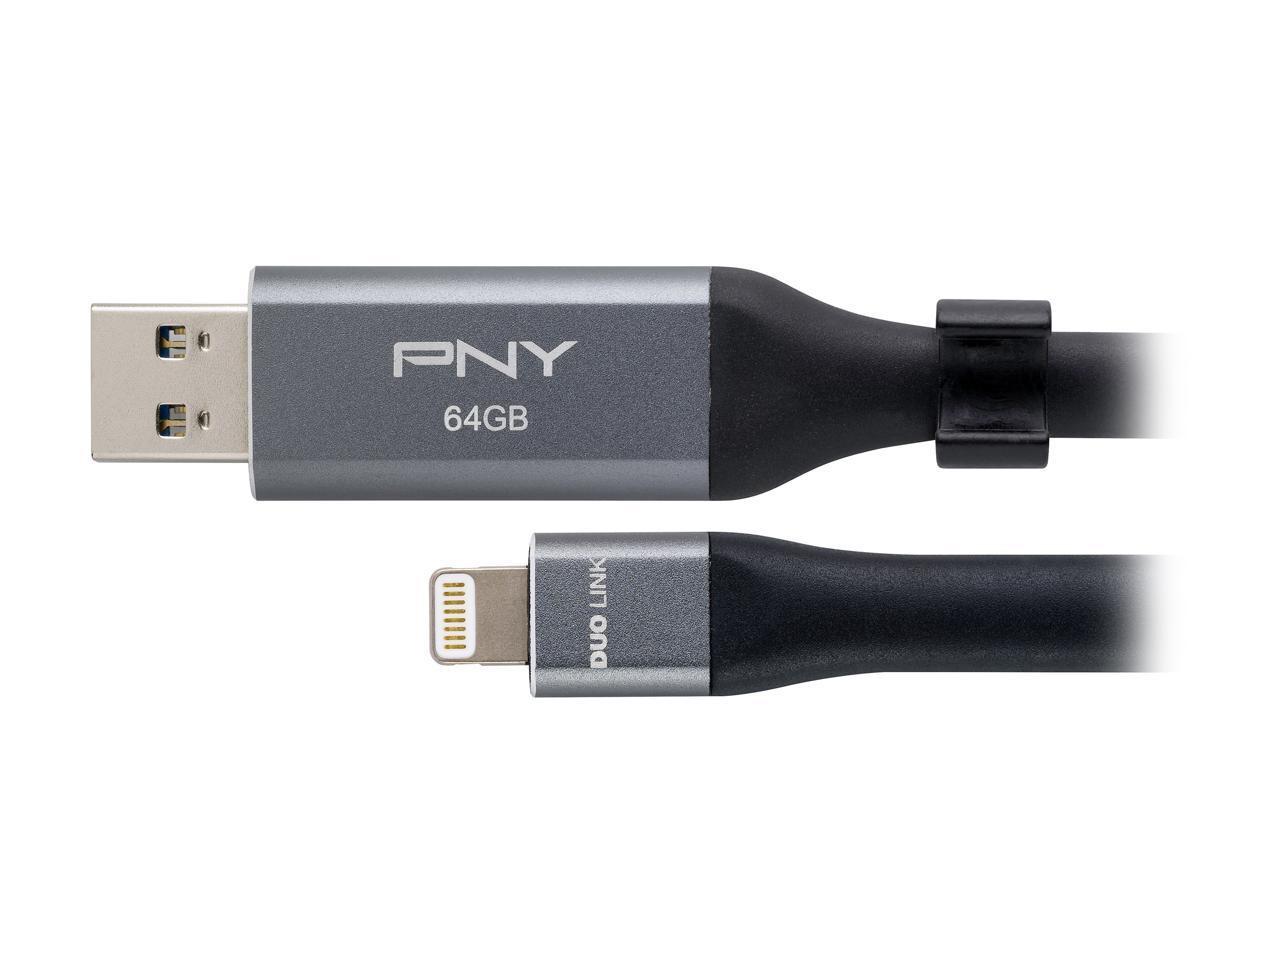 PNY 64GB DUO LINK USB 3.0 OTG Flash Drive for IPhone and I Pad (P-FDI64GLA02GC-RB)